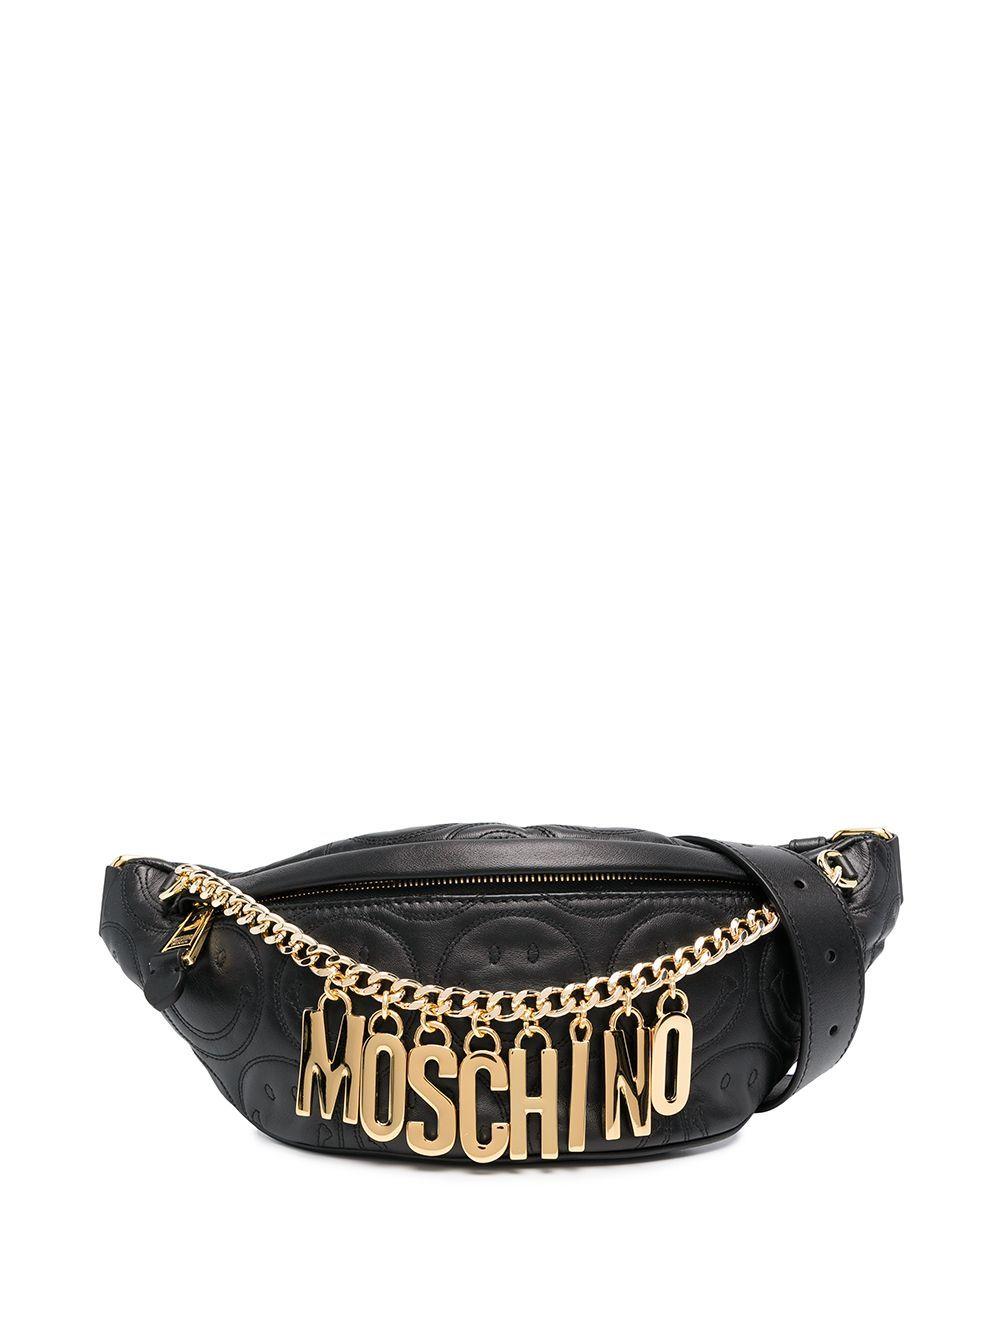 Moschino Smiley Face Logo Belt Bag in Black | Lyst Canada